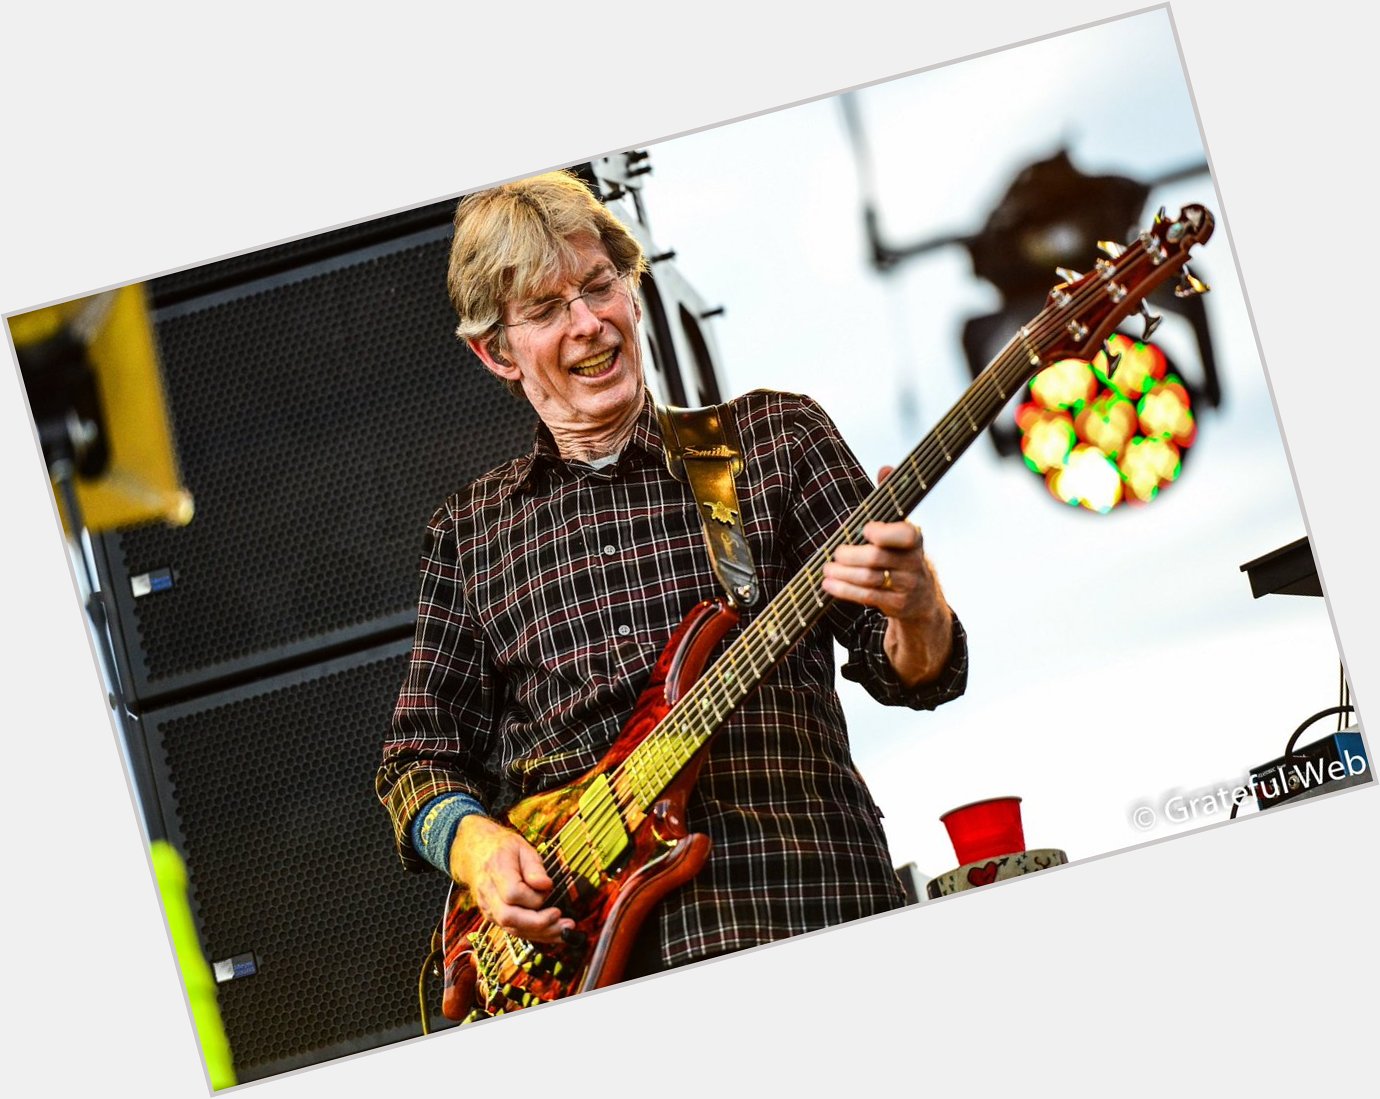 Happy 77th birthday to Phil Lesh, who will always be eternally young through his music 